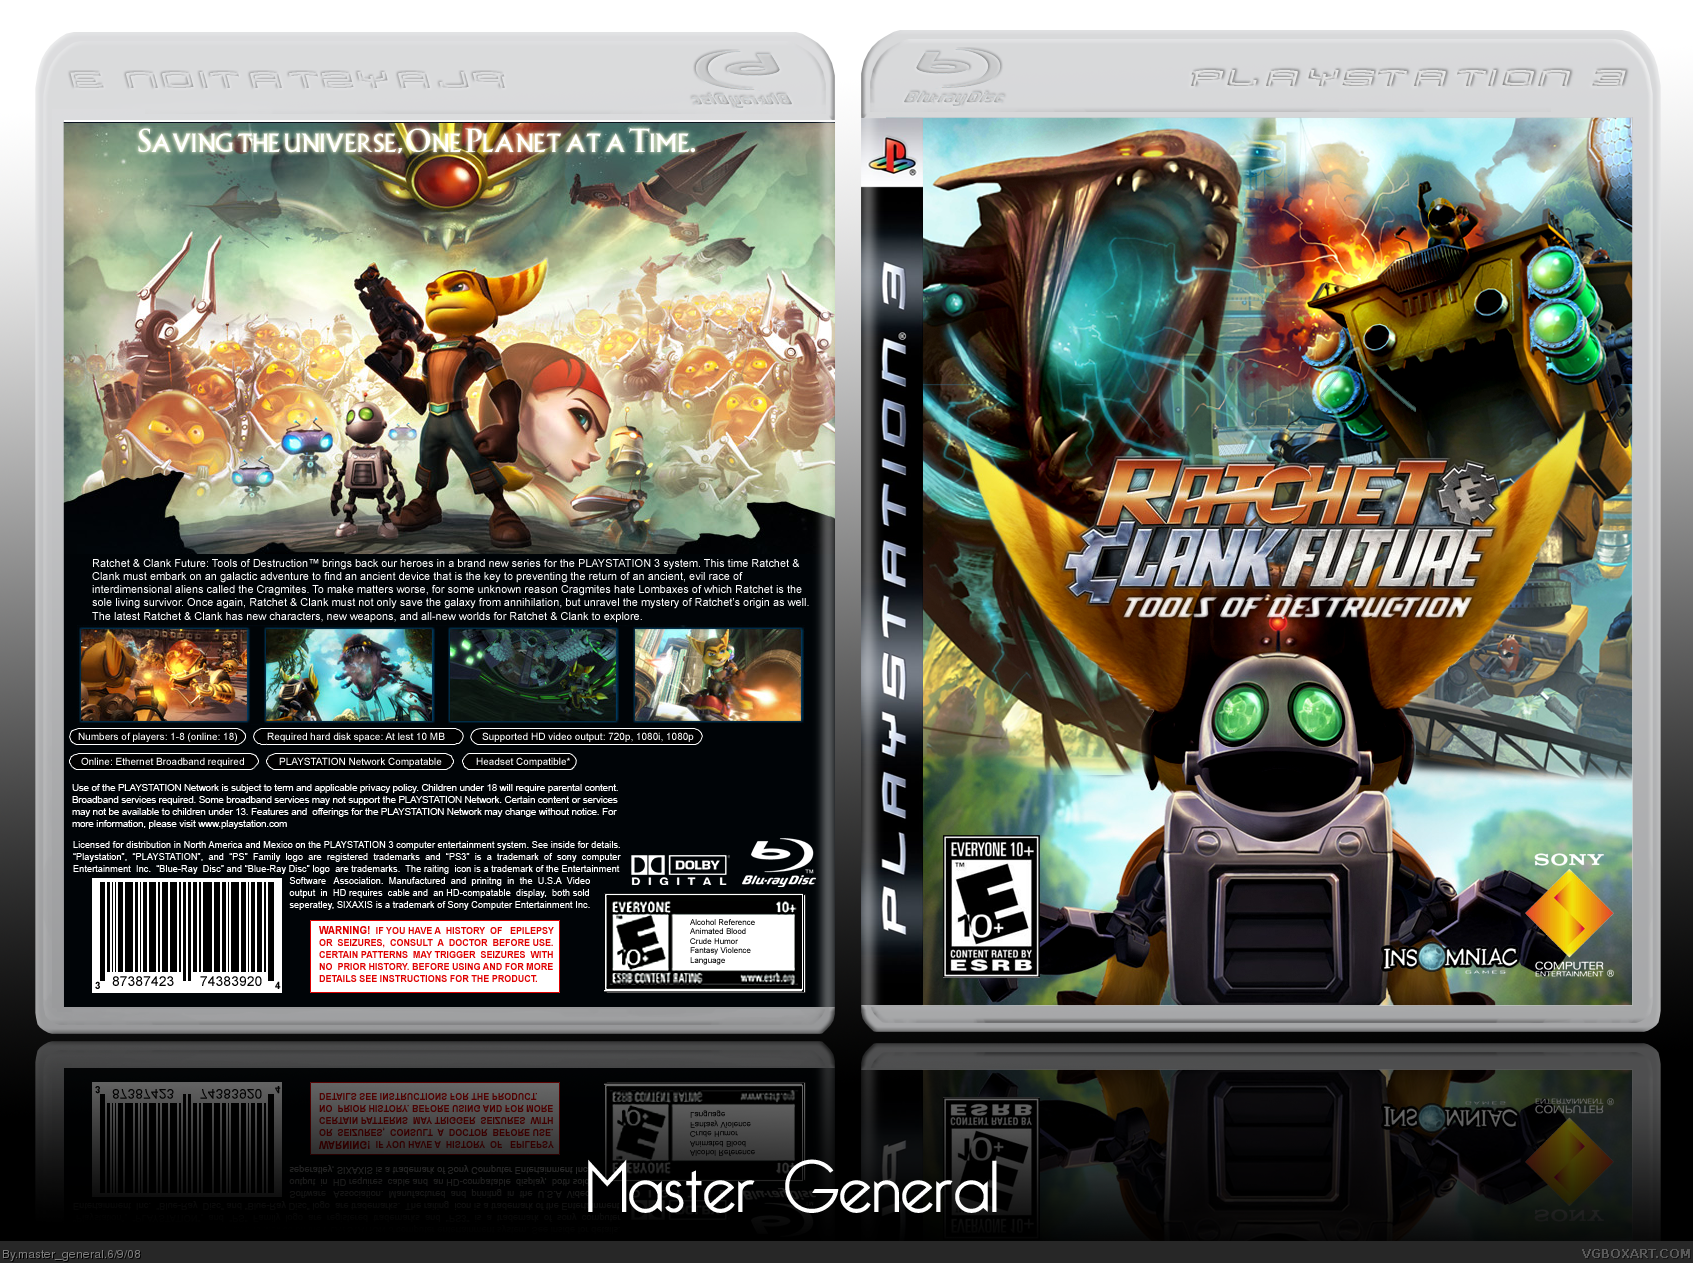 Ratchet and Clank Nexus ps3 обложка. Ratchet and Clank ps3. Ratchet and Clank Tools of Destruction ps3 Cover. Ratchet and Clank ps4 диск.